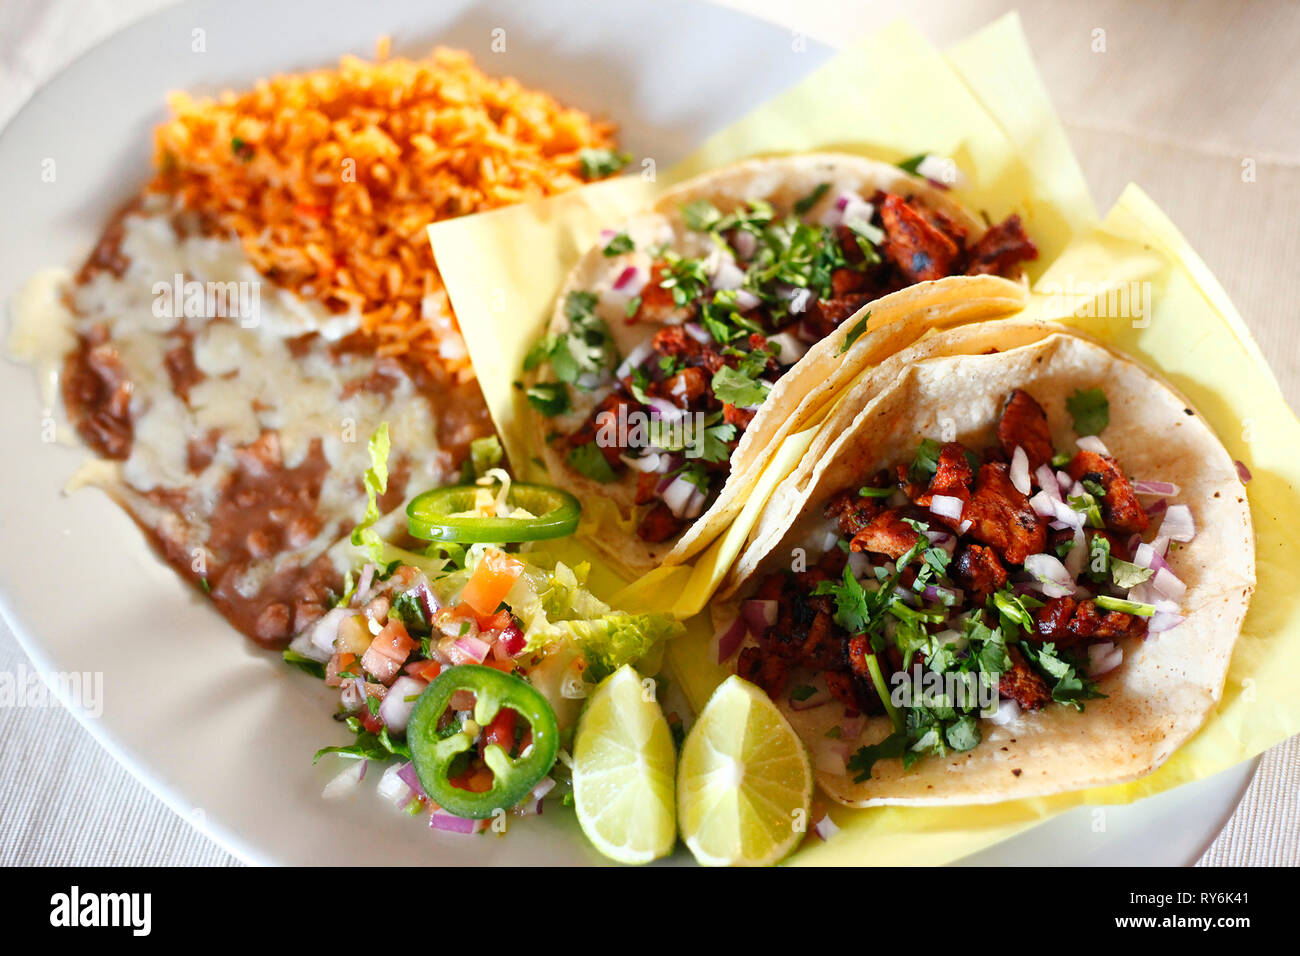 High angle view of tacos with meal served in plate on table Stock Photo